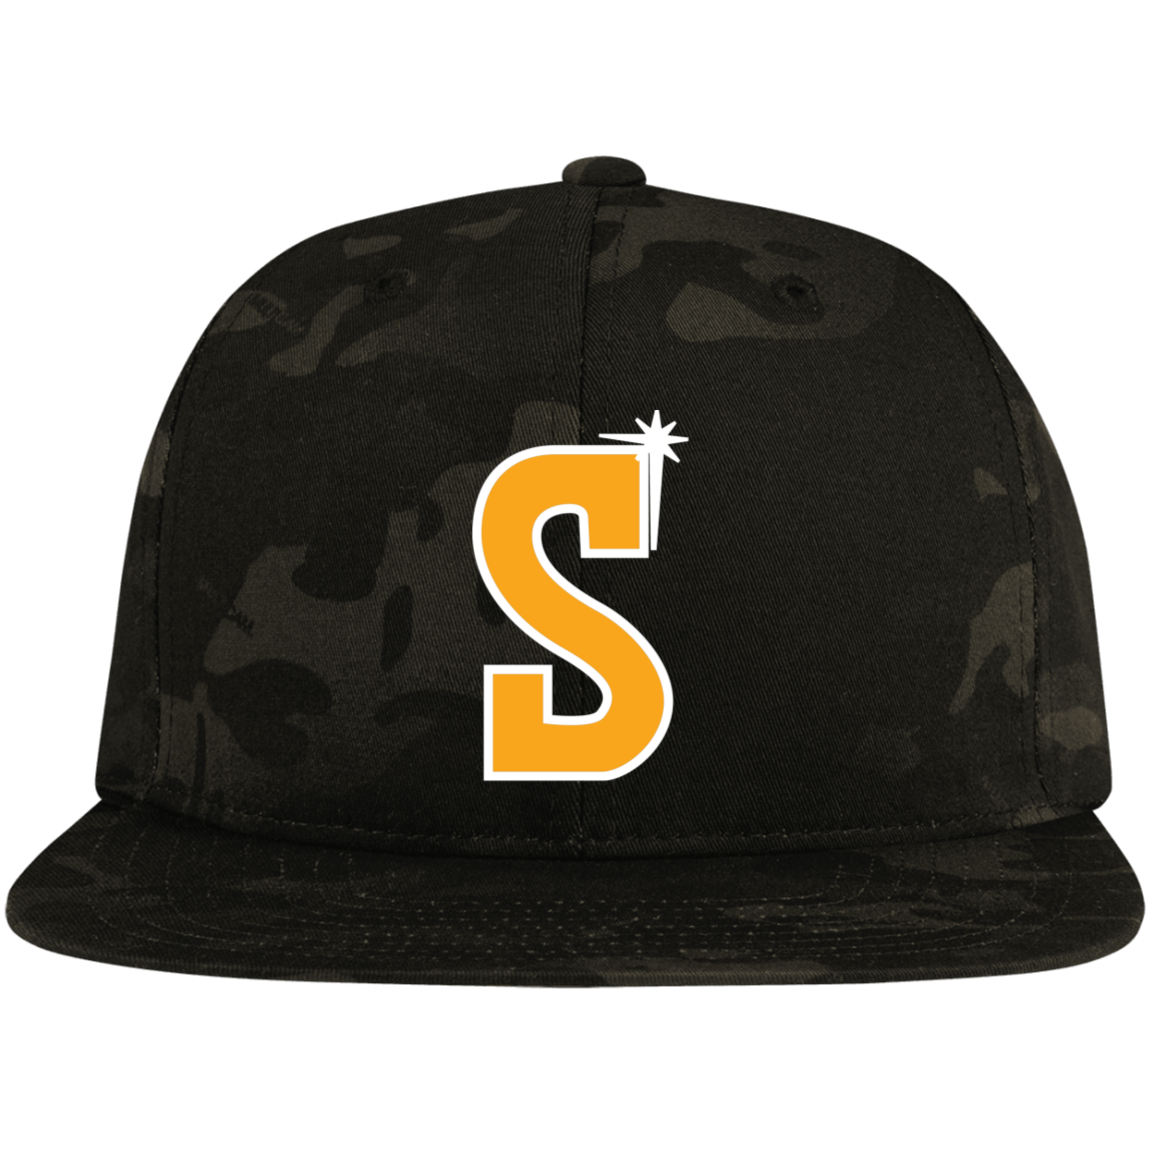 "S" STC19 Embroidered Flat Bill High-Profile Snapback Hat